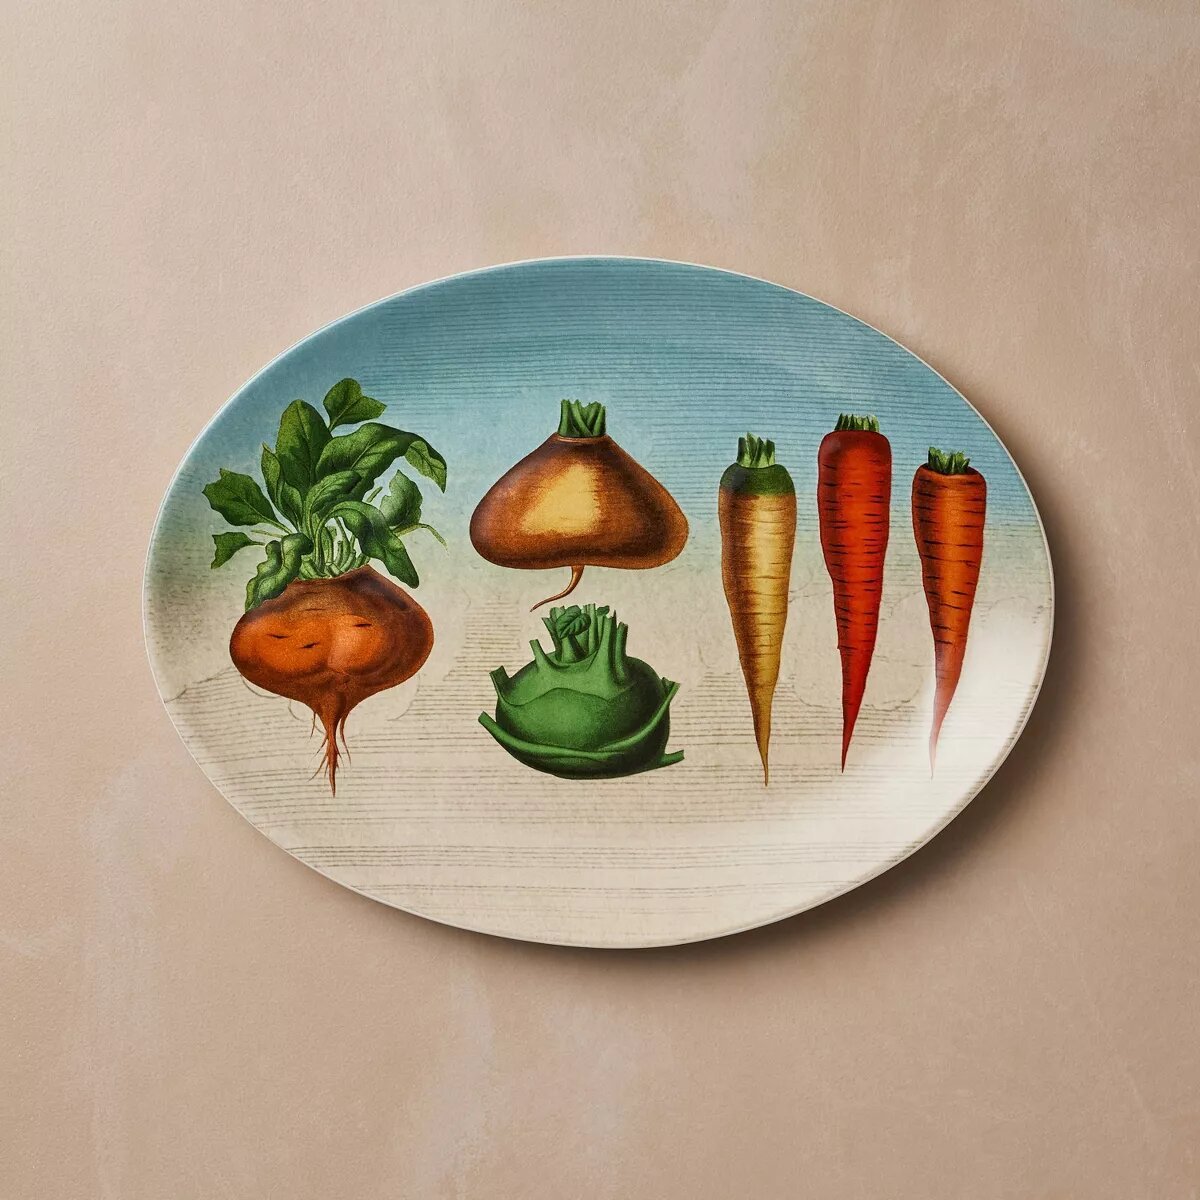 9"x12" Oval Stoneware Platter Fall Root Vegetables